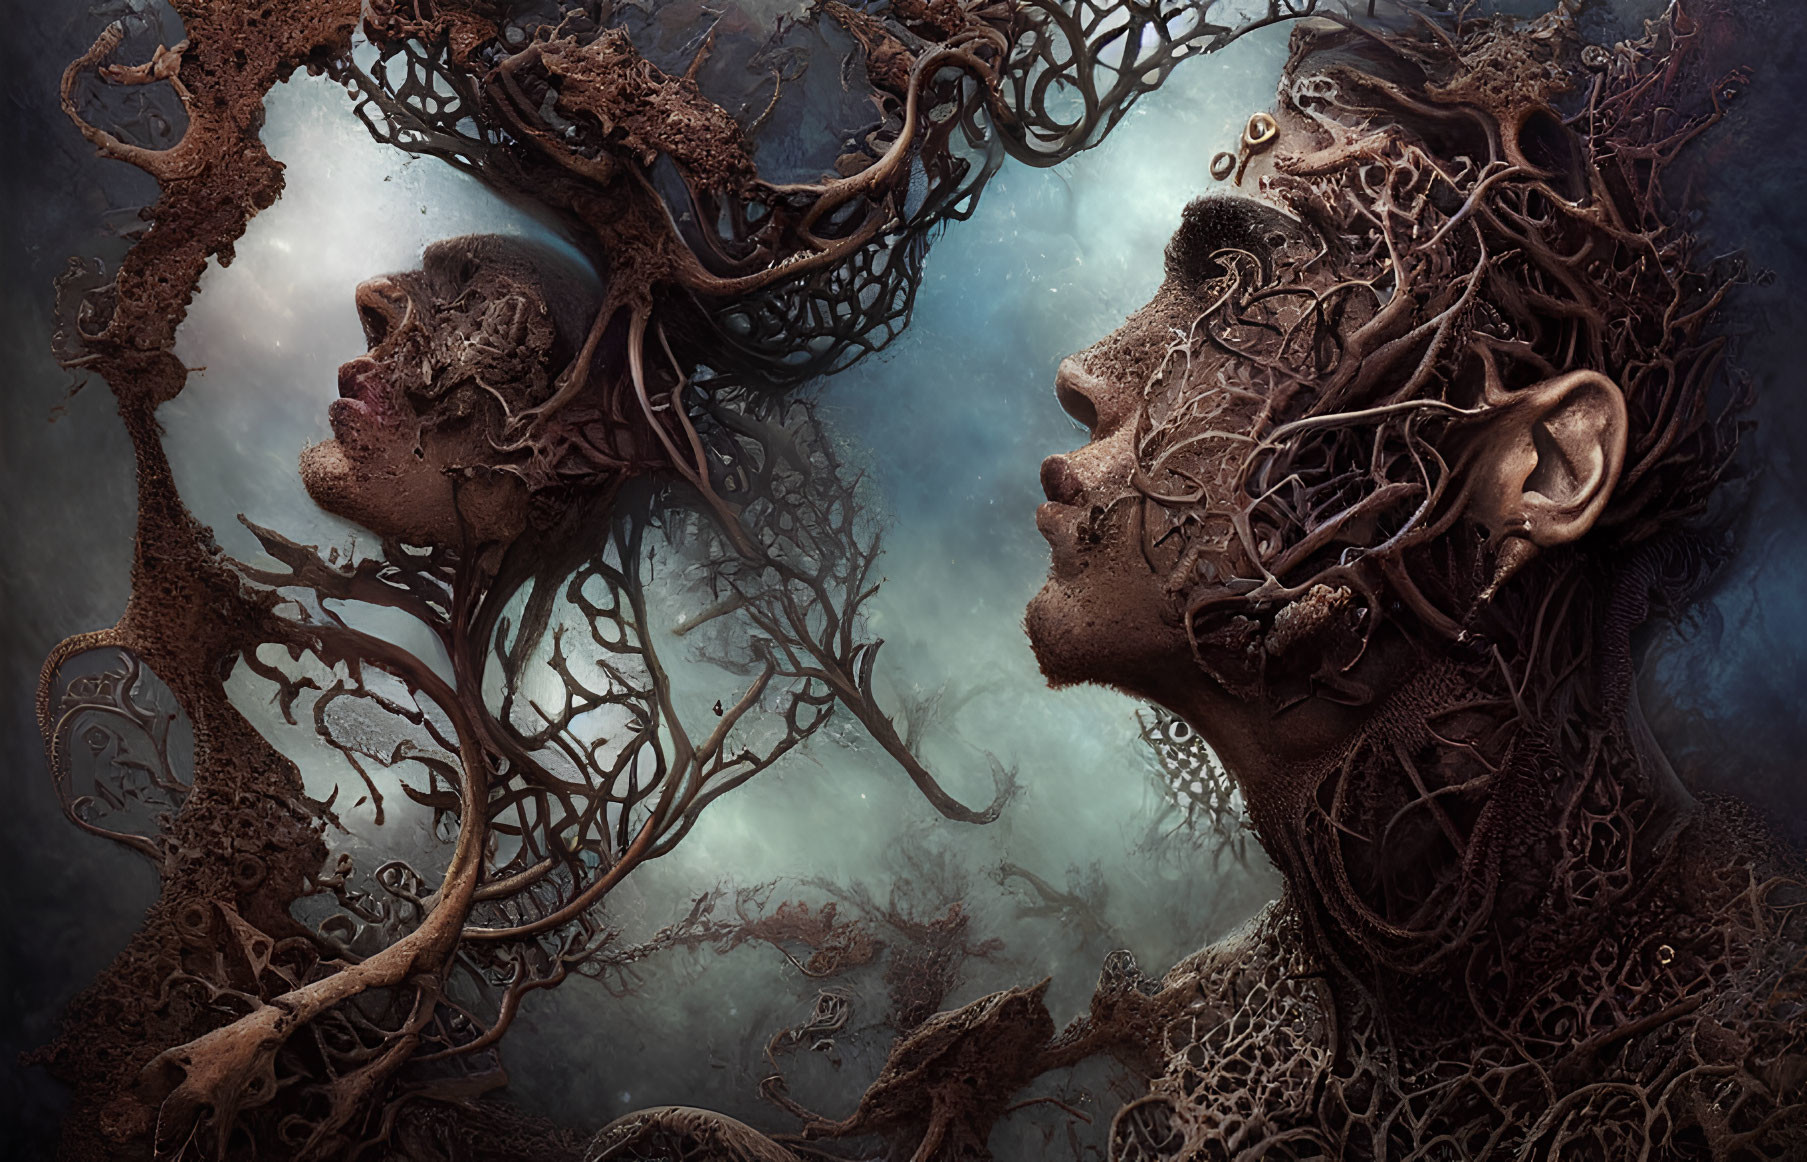 Surreal artwork: Two faces with tree-like structures and misty background